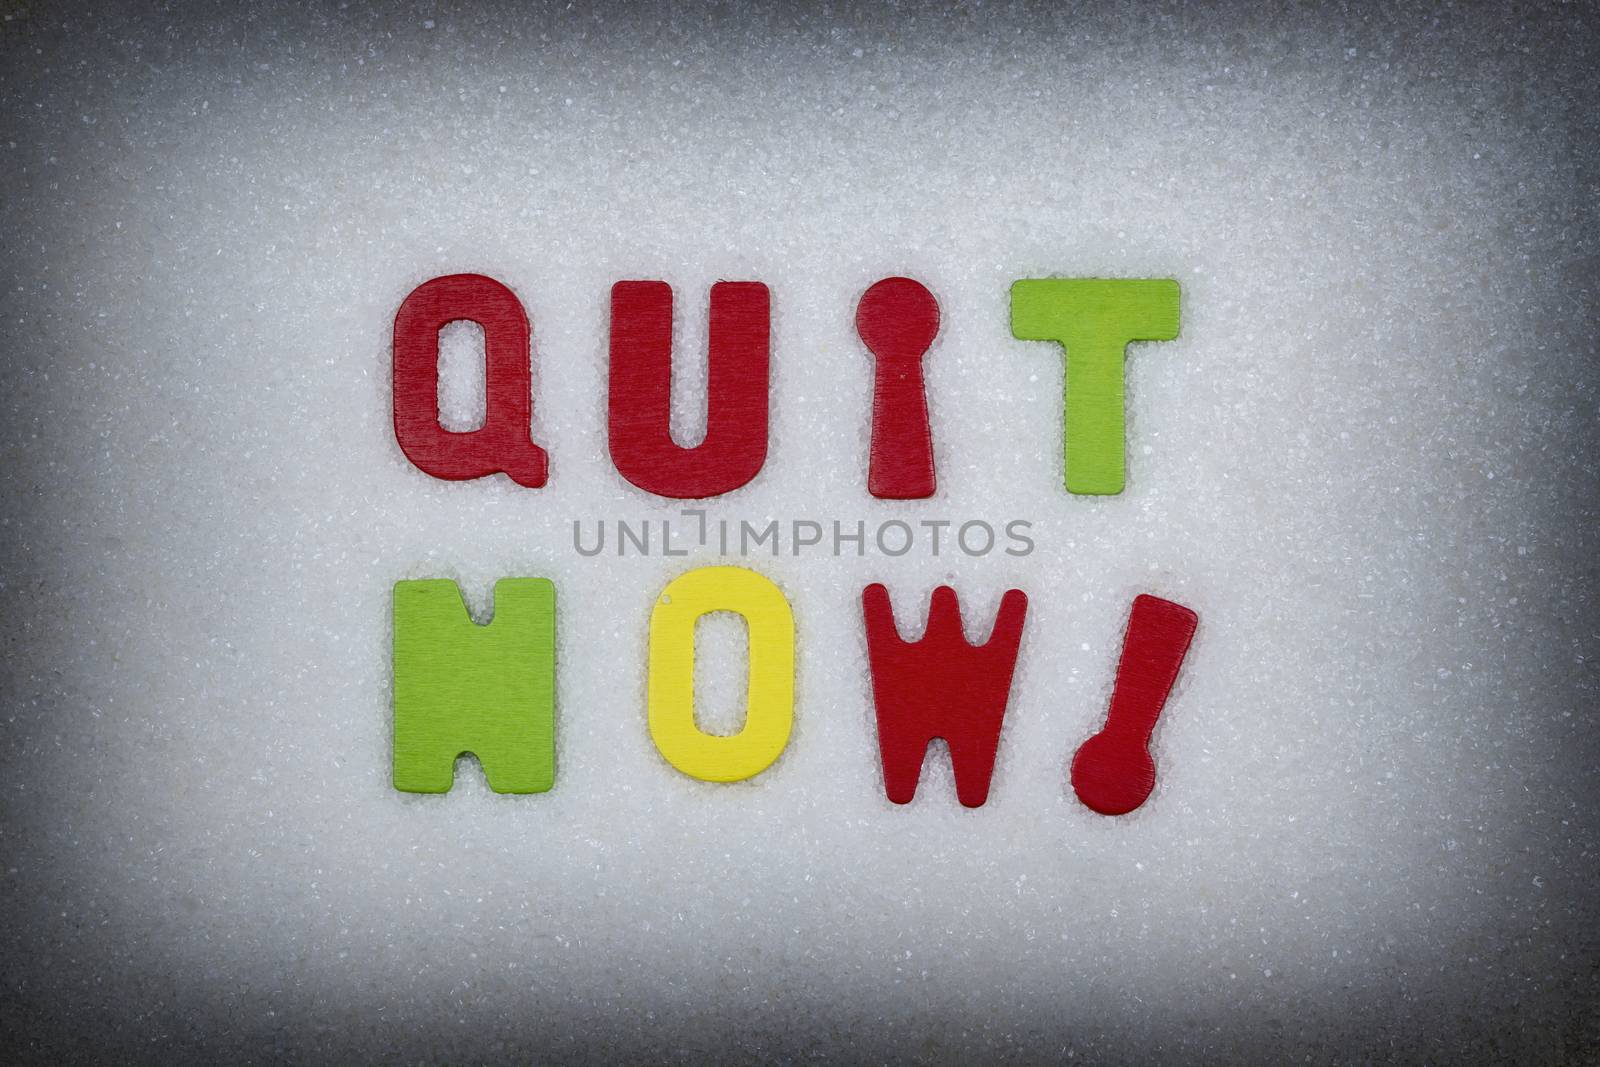 "Quit now!" Colorful text and letters in wood on white sugar crystals background and black vignette border